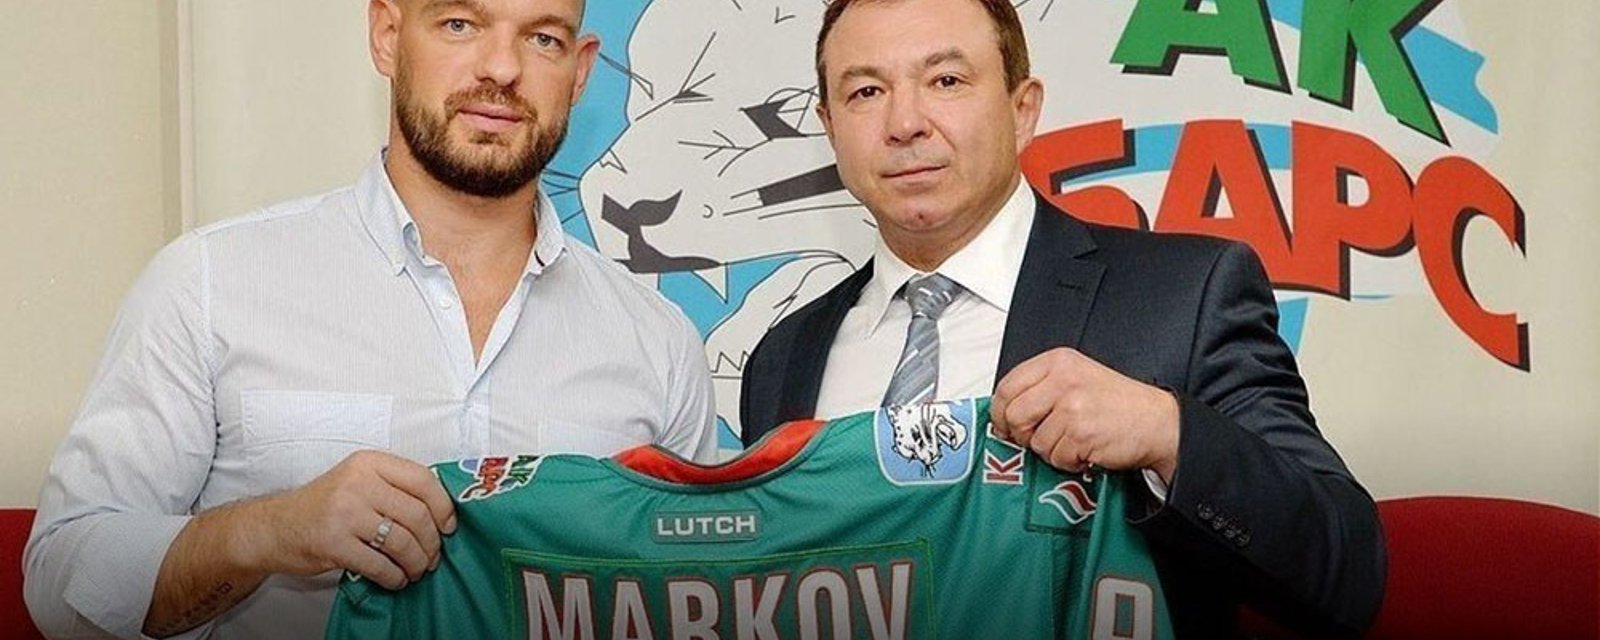 Official: Markov signs in KHL